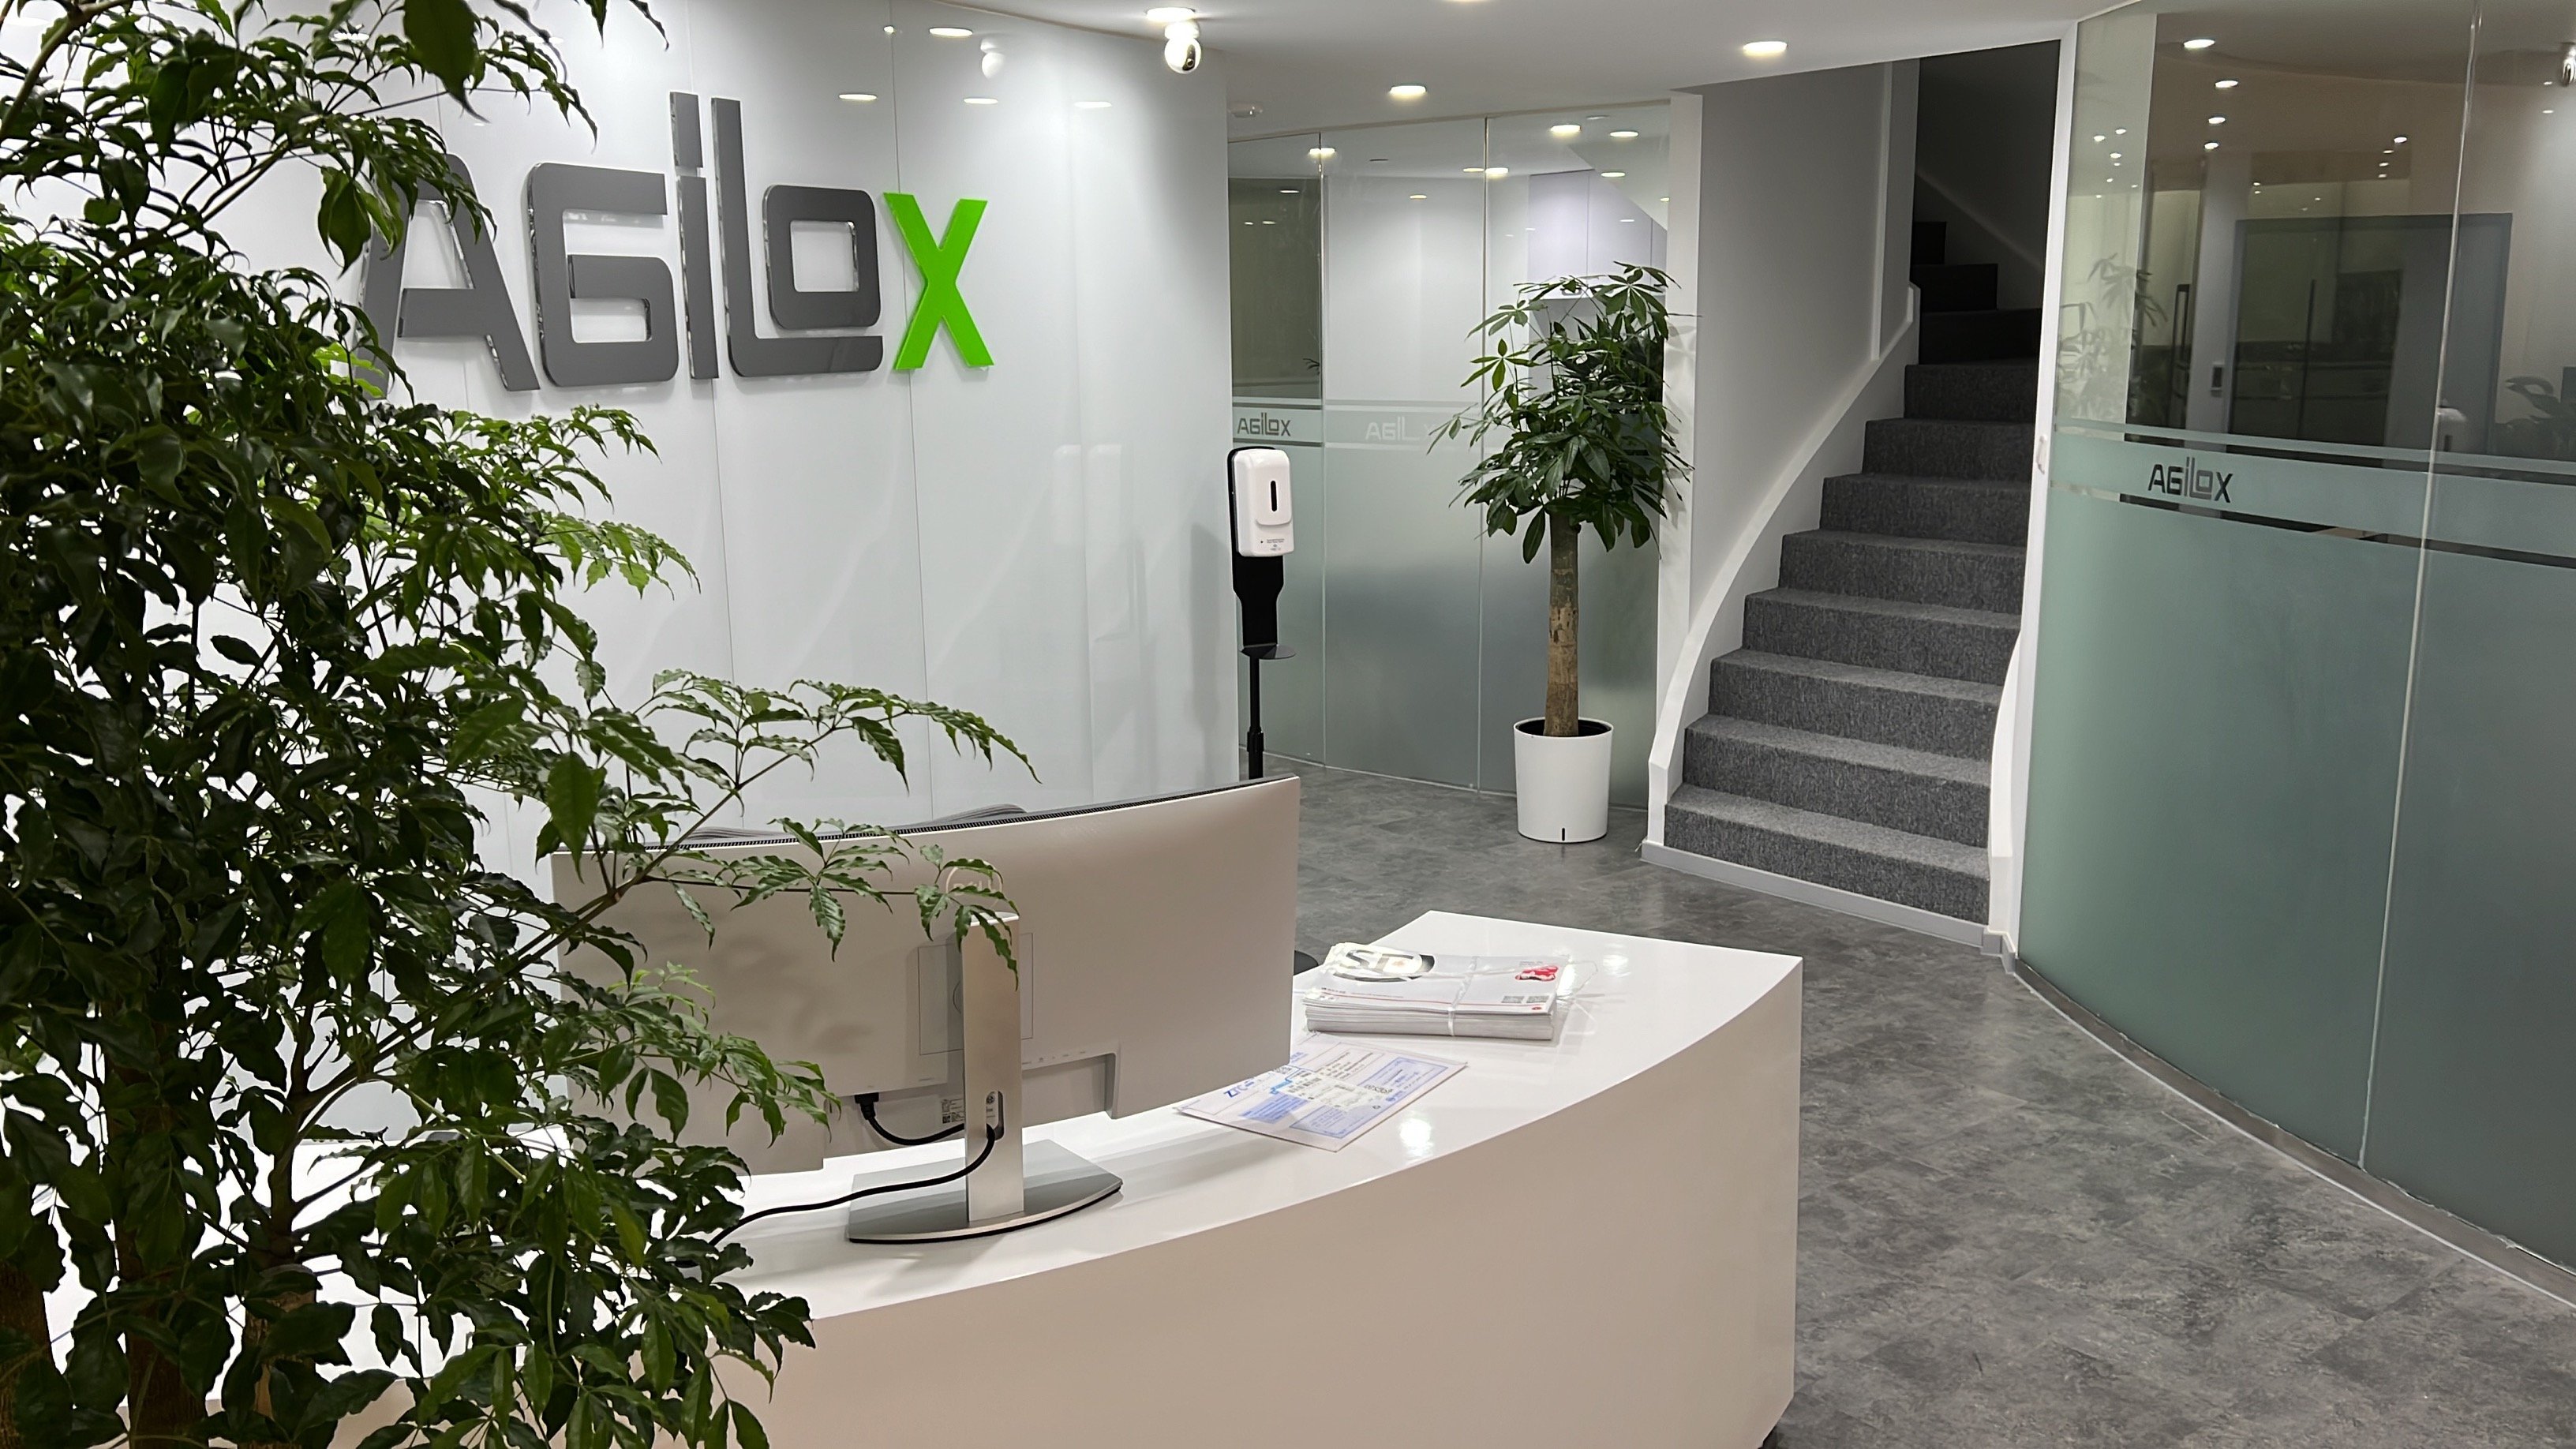 AGILOX expands to China